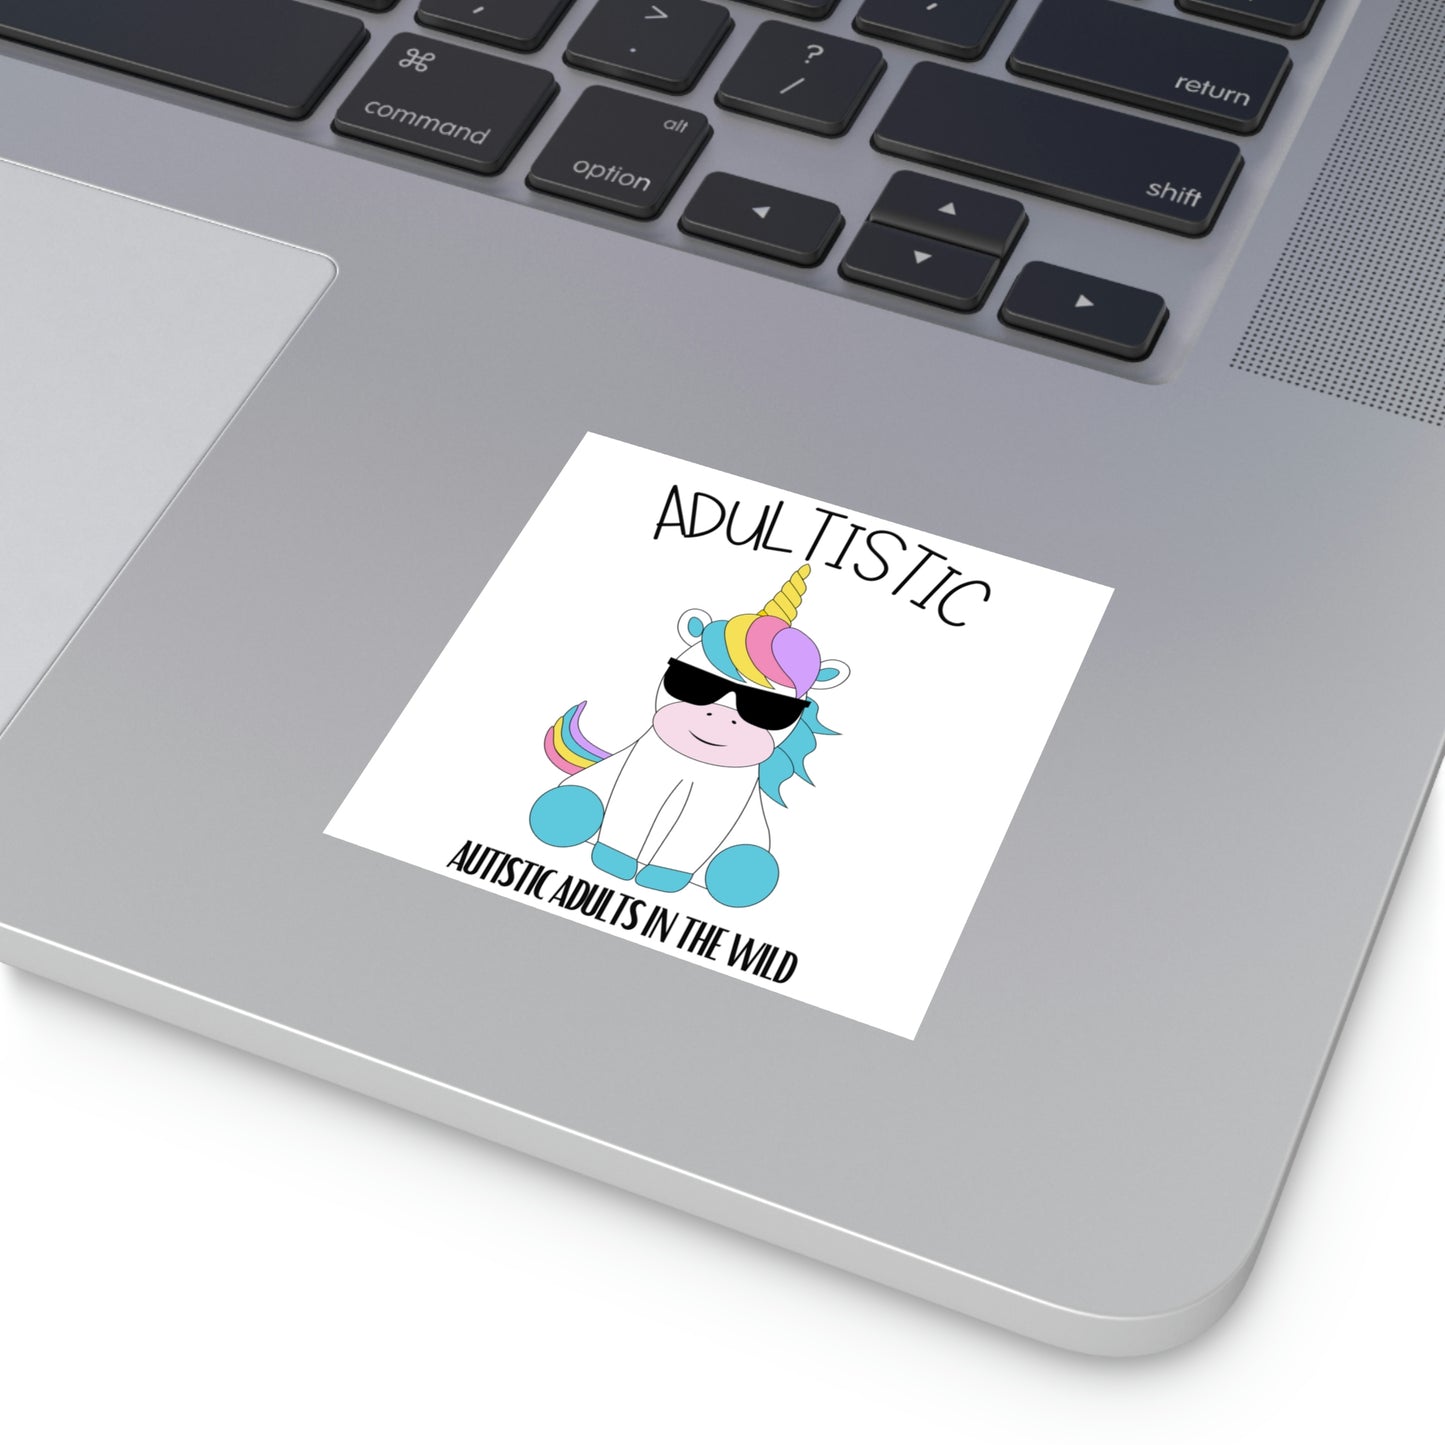 "Autistic Adults In The Wild" Shady Unicorn Square Stickers [Indoor\Outdoor]